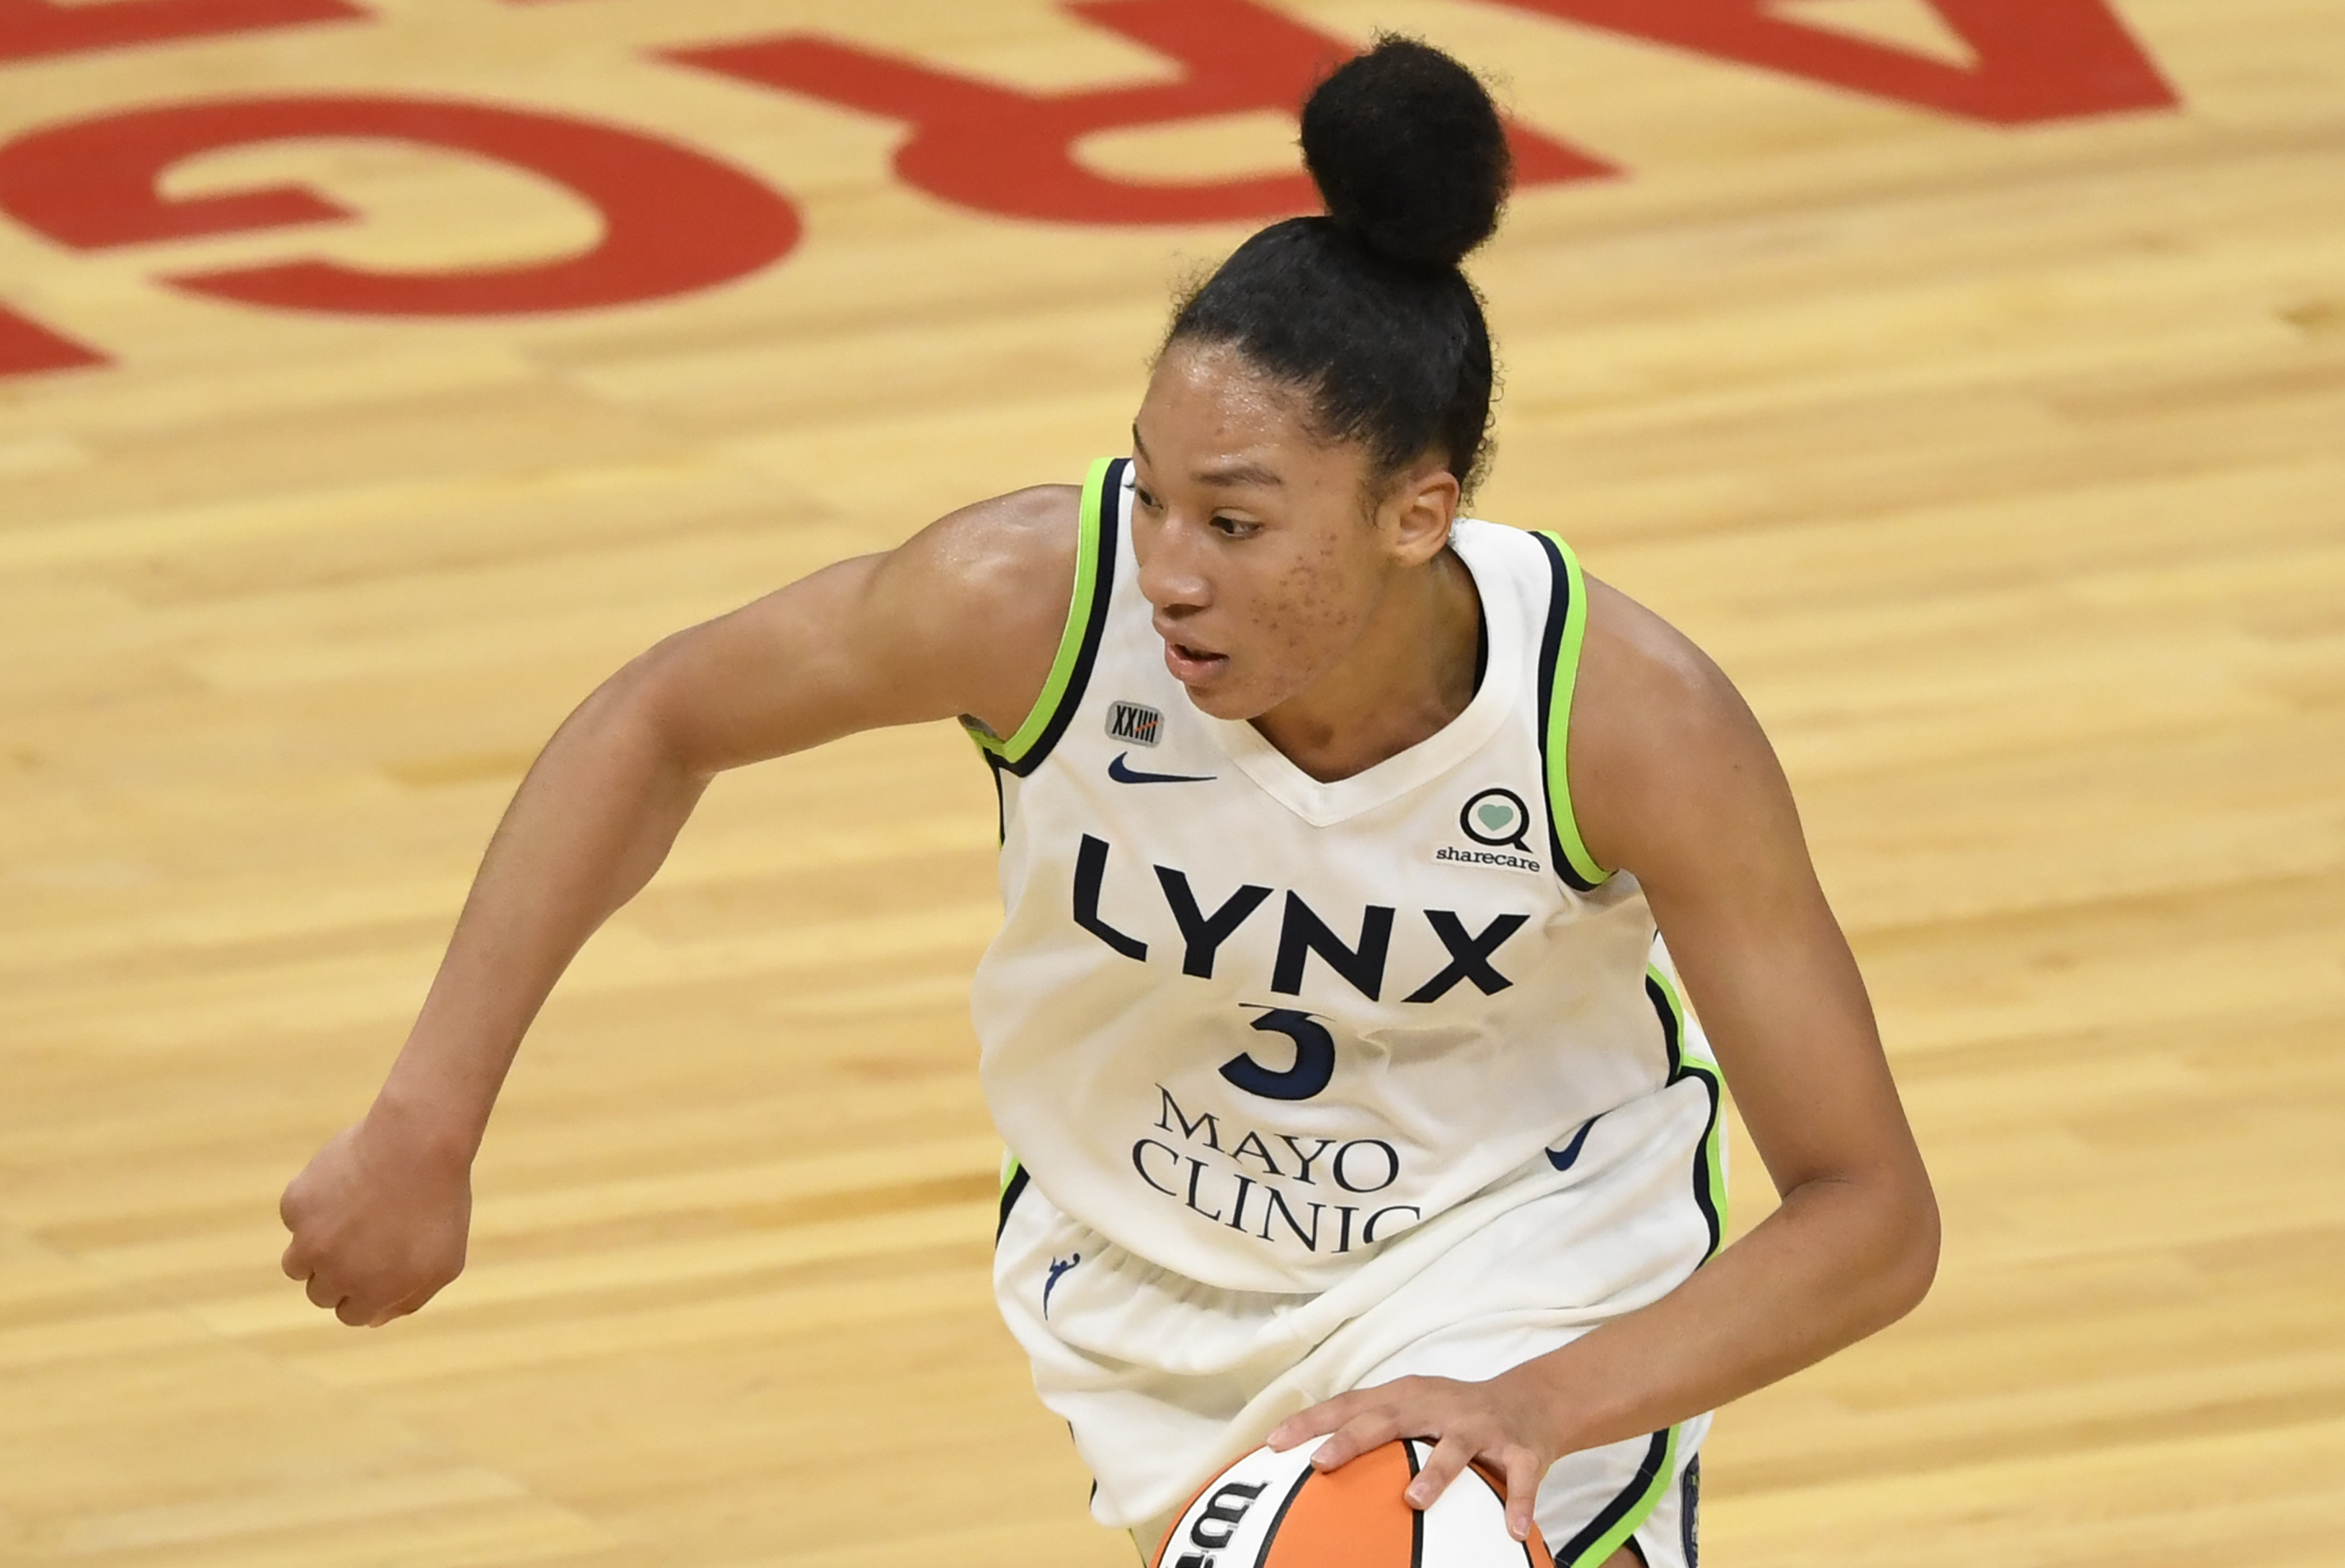 Dallas Wings guard Aerial Powers could return from injury within